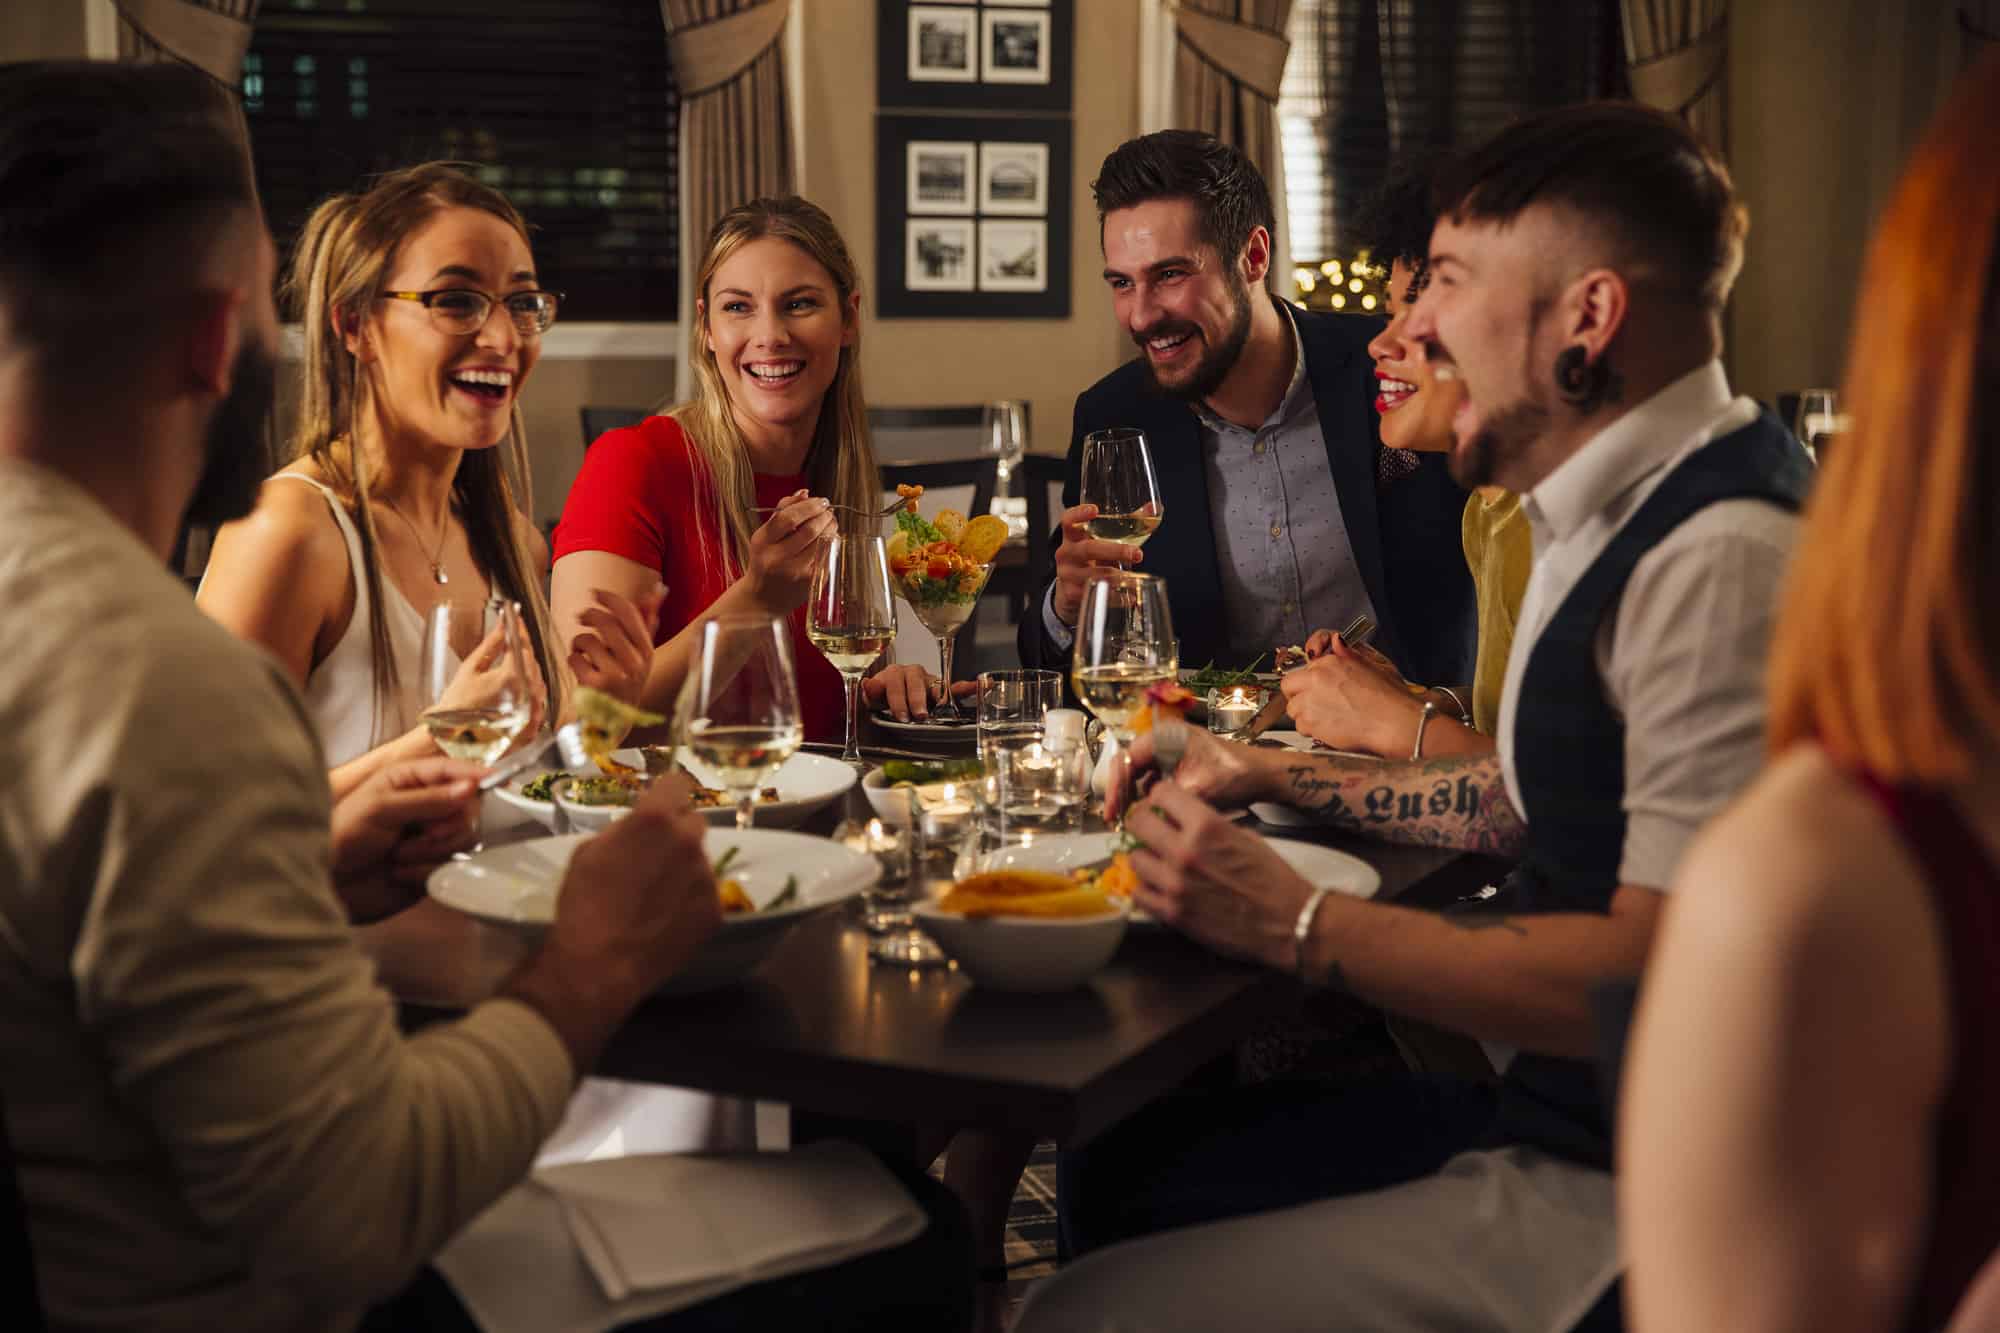 A group of friends are enjoying a meal together. They are talking and laughing while eating their starters and drinking champagne.